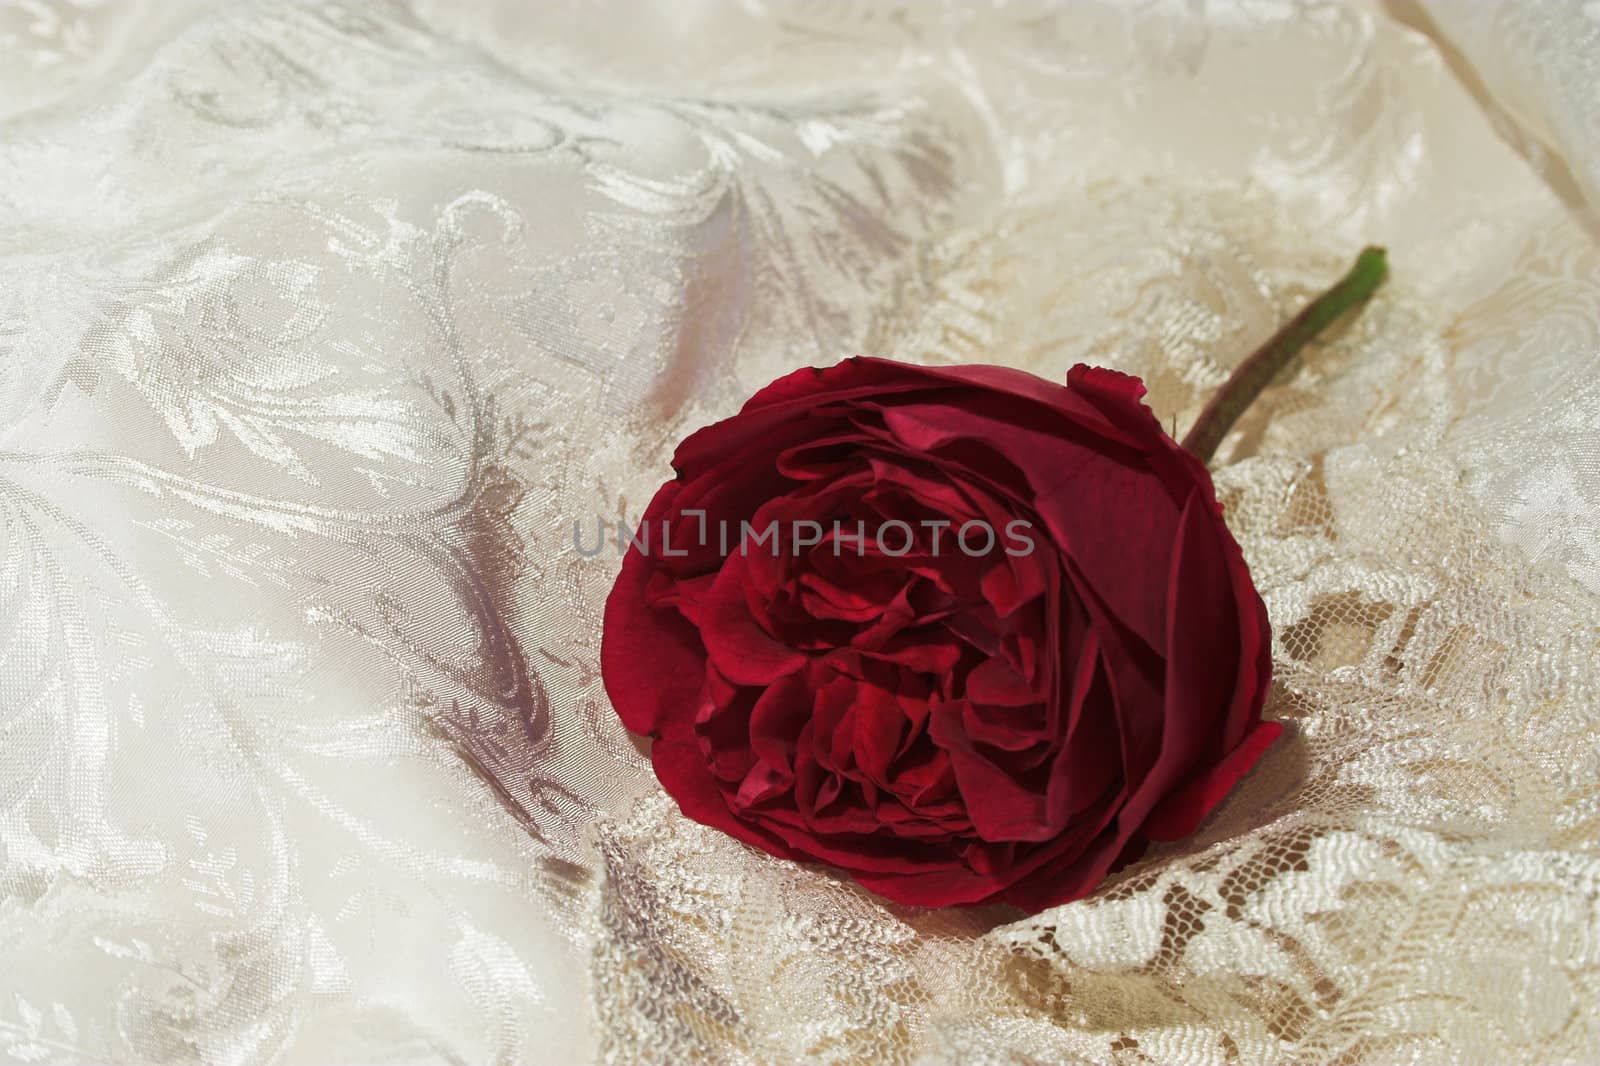 A full blown rose discarded on satin and old lace